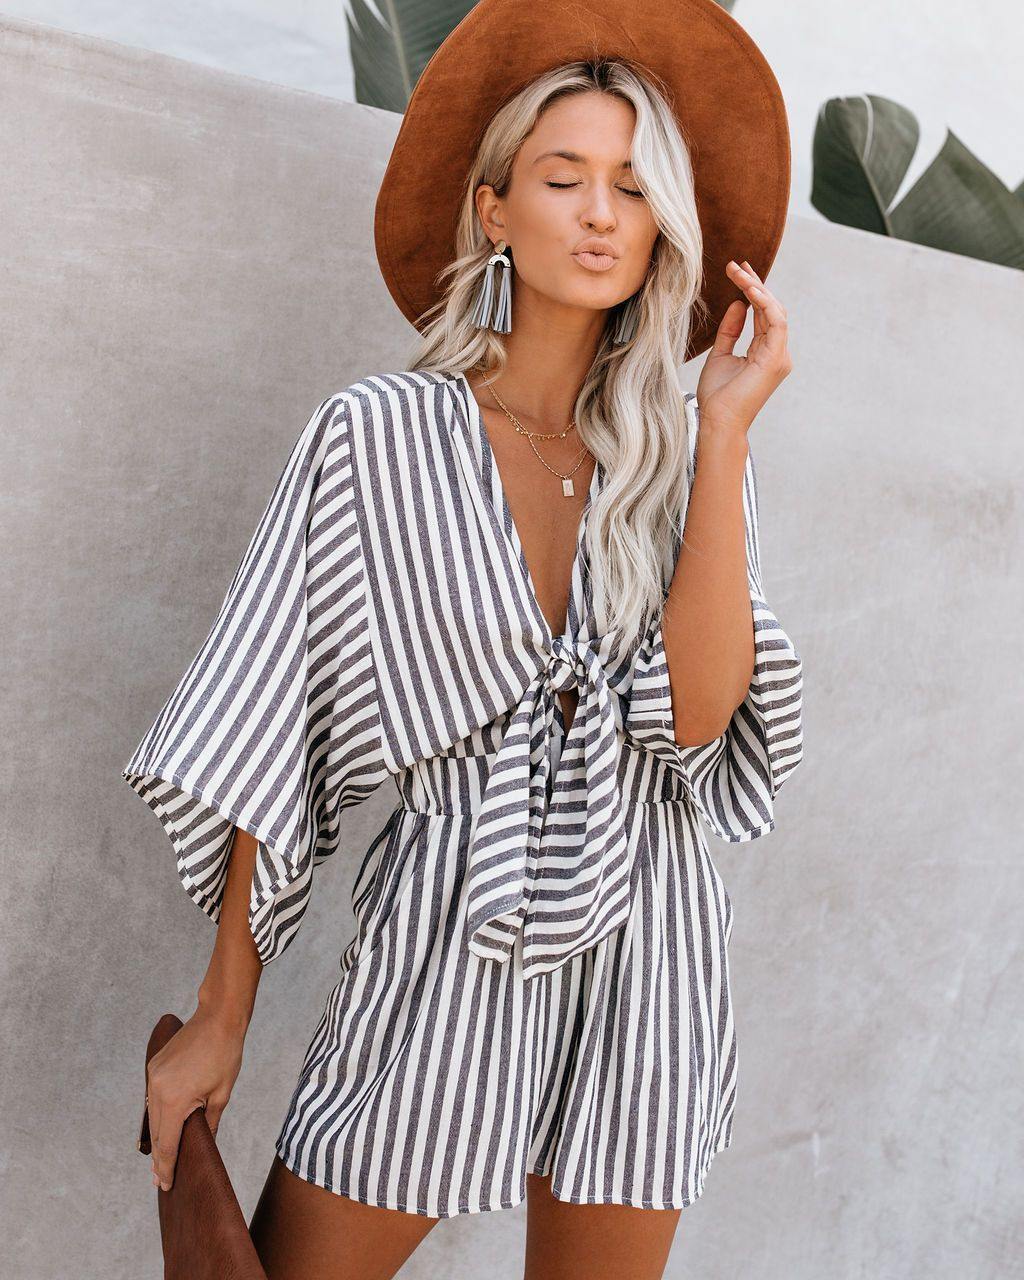 Summer High Waist Short Jumpsuits-One Piece Suits-The same as picture-S-Free Shipping Leatheretro